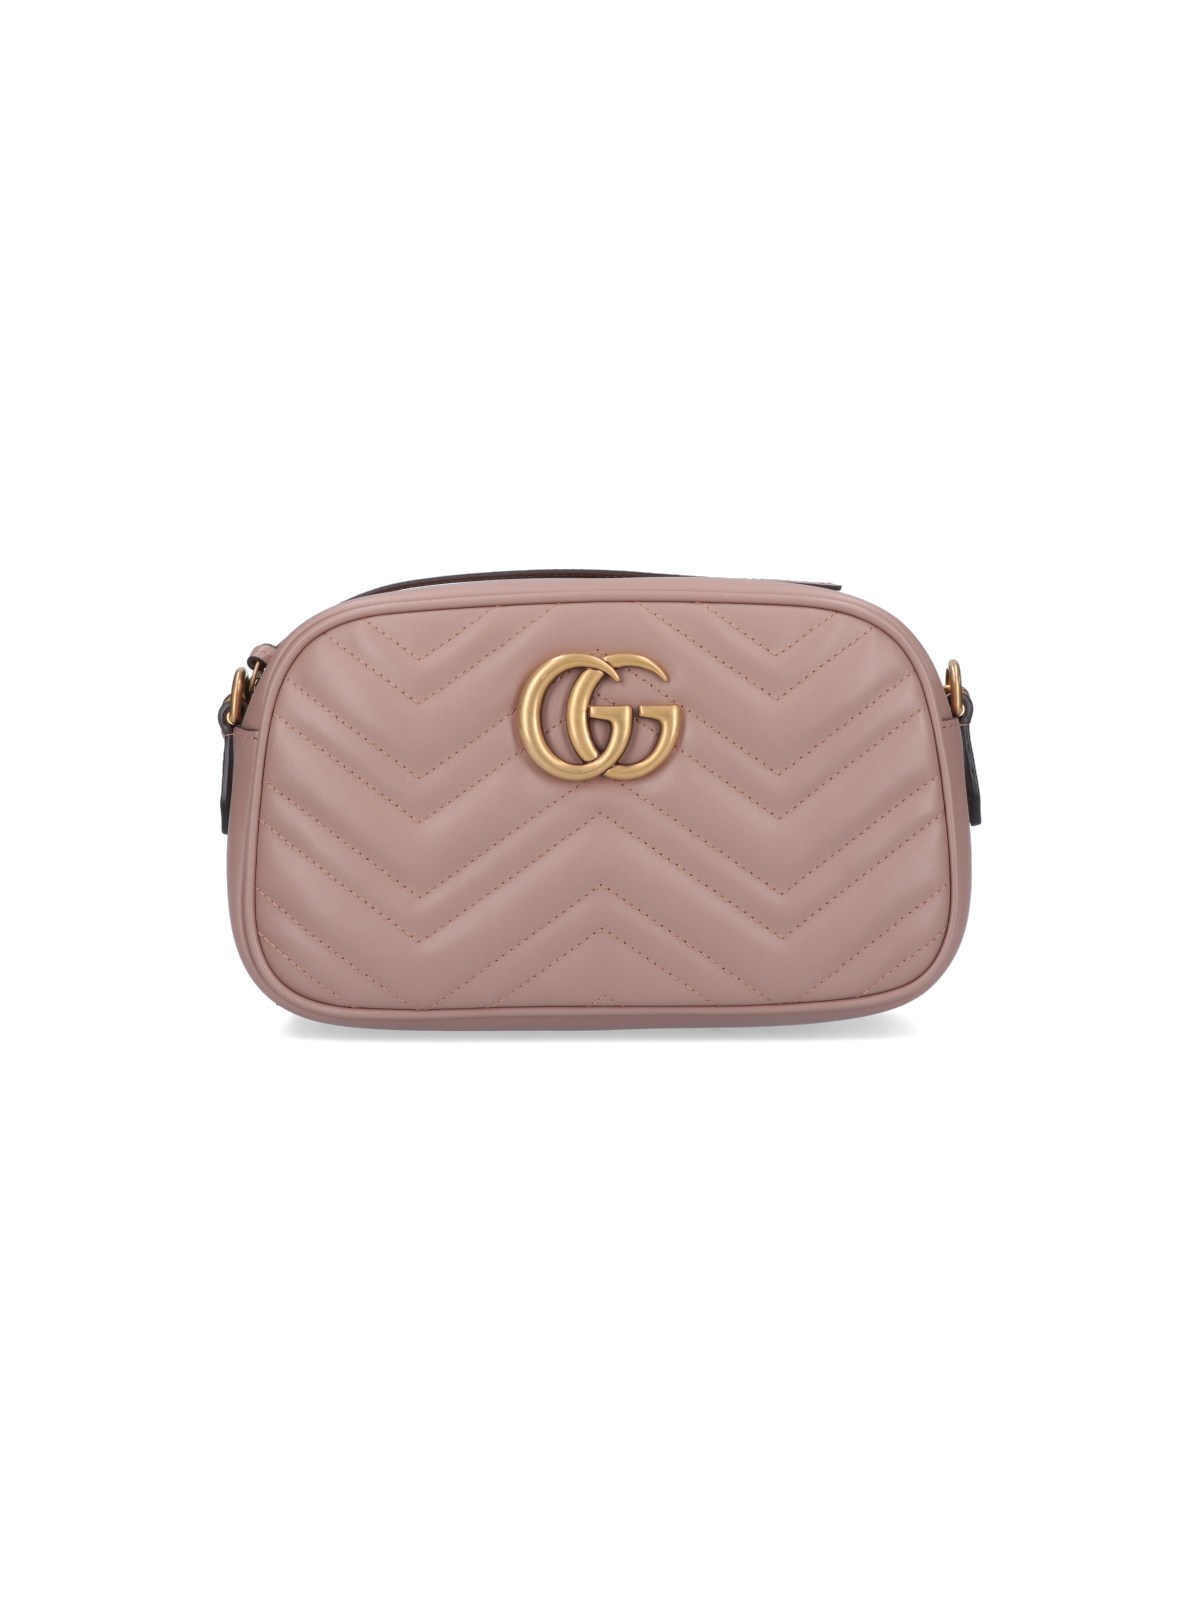 GUCCI 'GG MARMONT' SMALL SHOULDER BAG